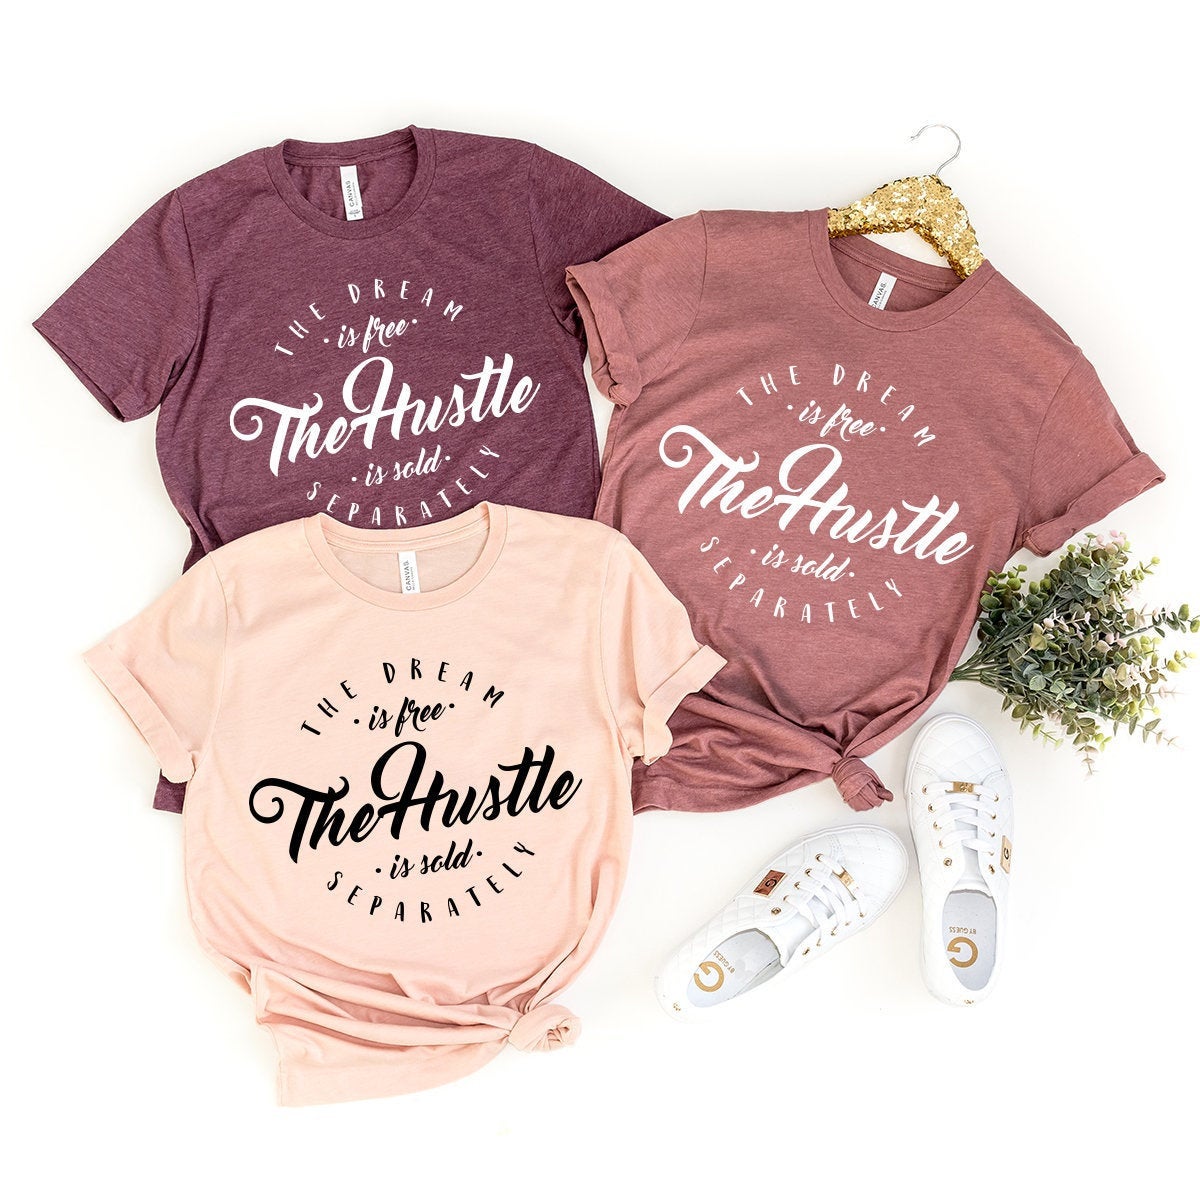 The Dream Is Free The Hustle Is Sold Separately T-Shirt, Girl Boss Shirt, Empowered Women Shirt, Inspirational Quote Shirt, Motivational Tee - Fastdeliverytees.com